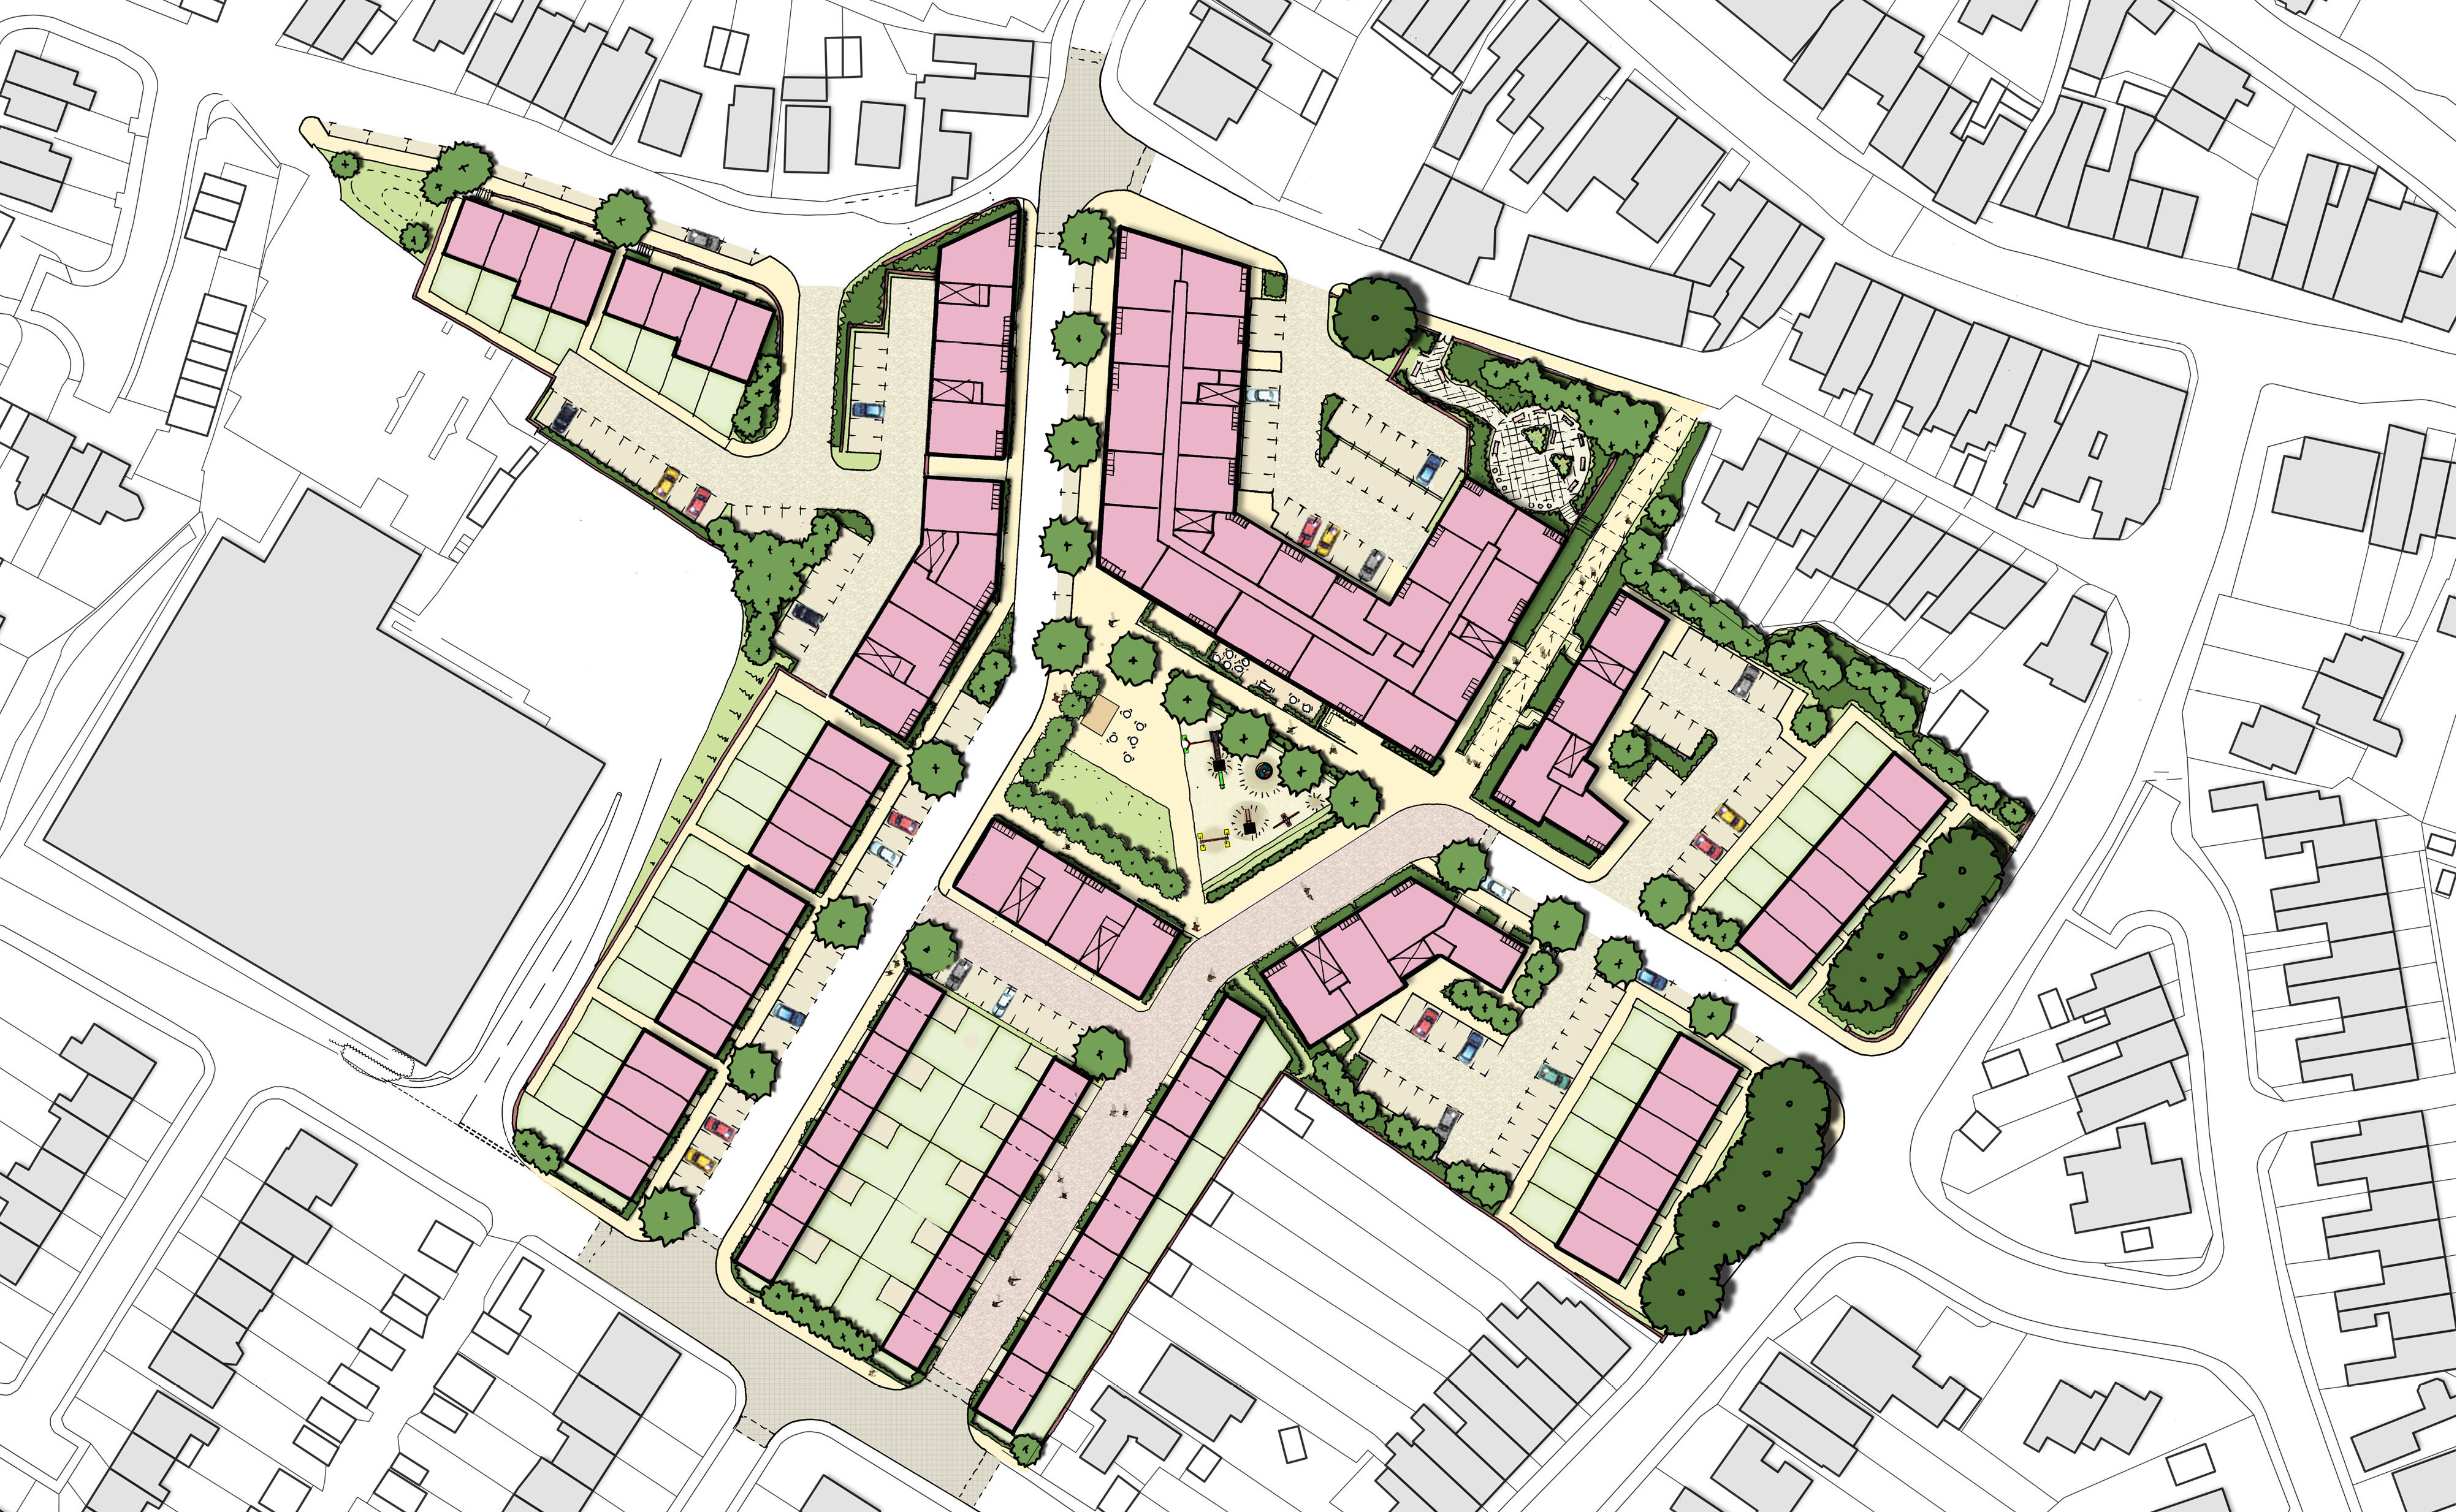 Planning permission for redevelopment of brownfield site